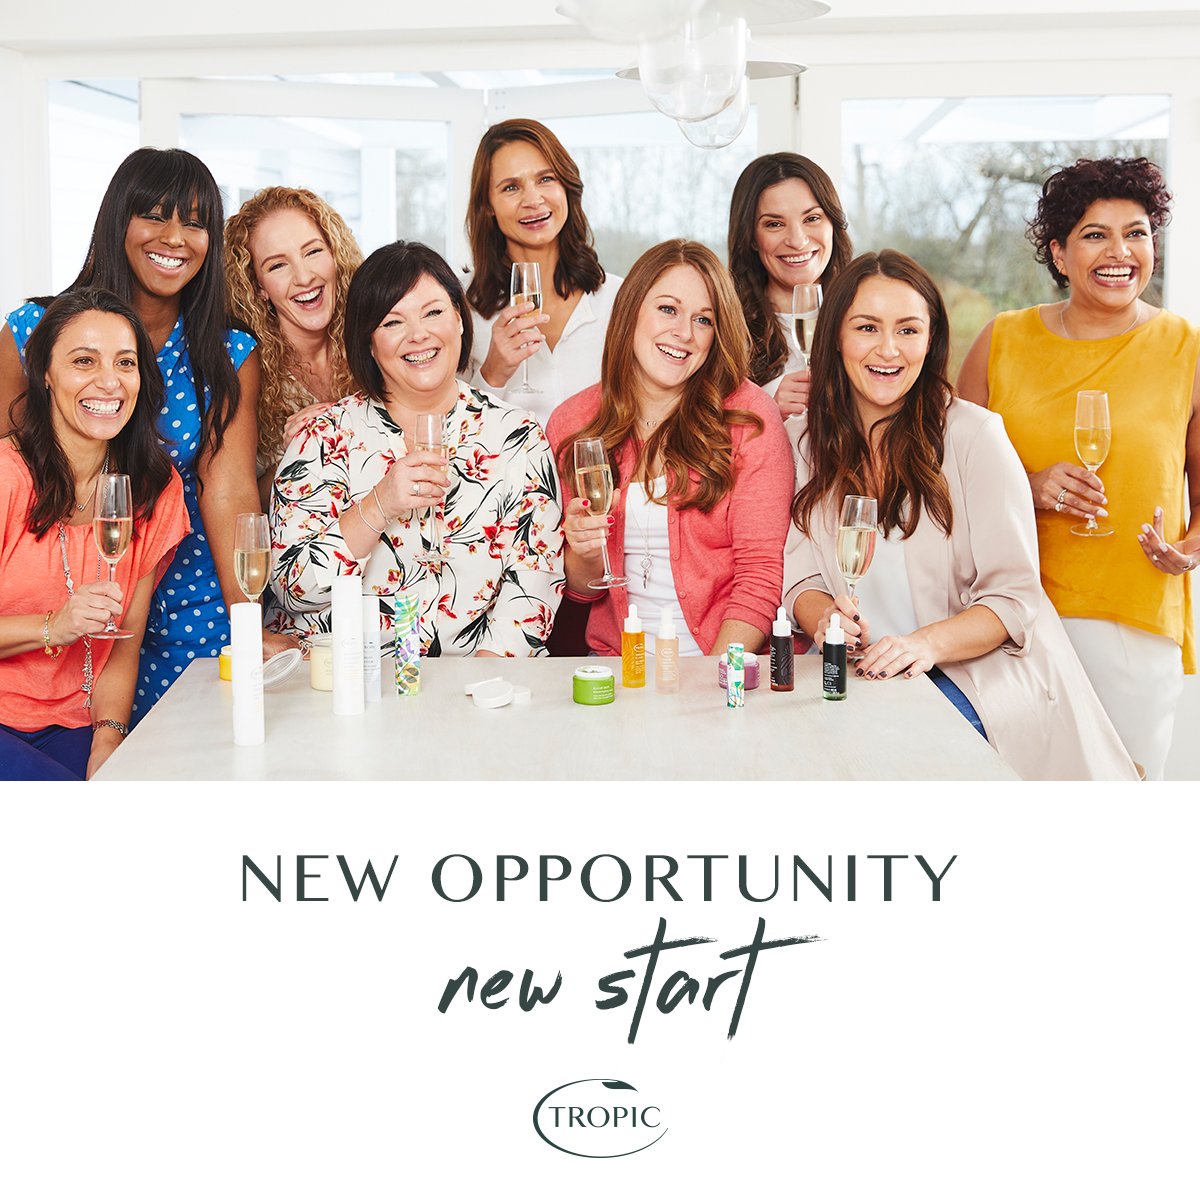 There's never been a better time, join me in this Green Beauty Revolution.
Tropicwithlynda.com
#Greenbeautyrevolution #veganbeauty #CrueltyFree #skincare #haircare #naturalhaircare #JoinMe #opportunity #letsworktogether